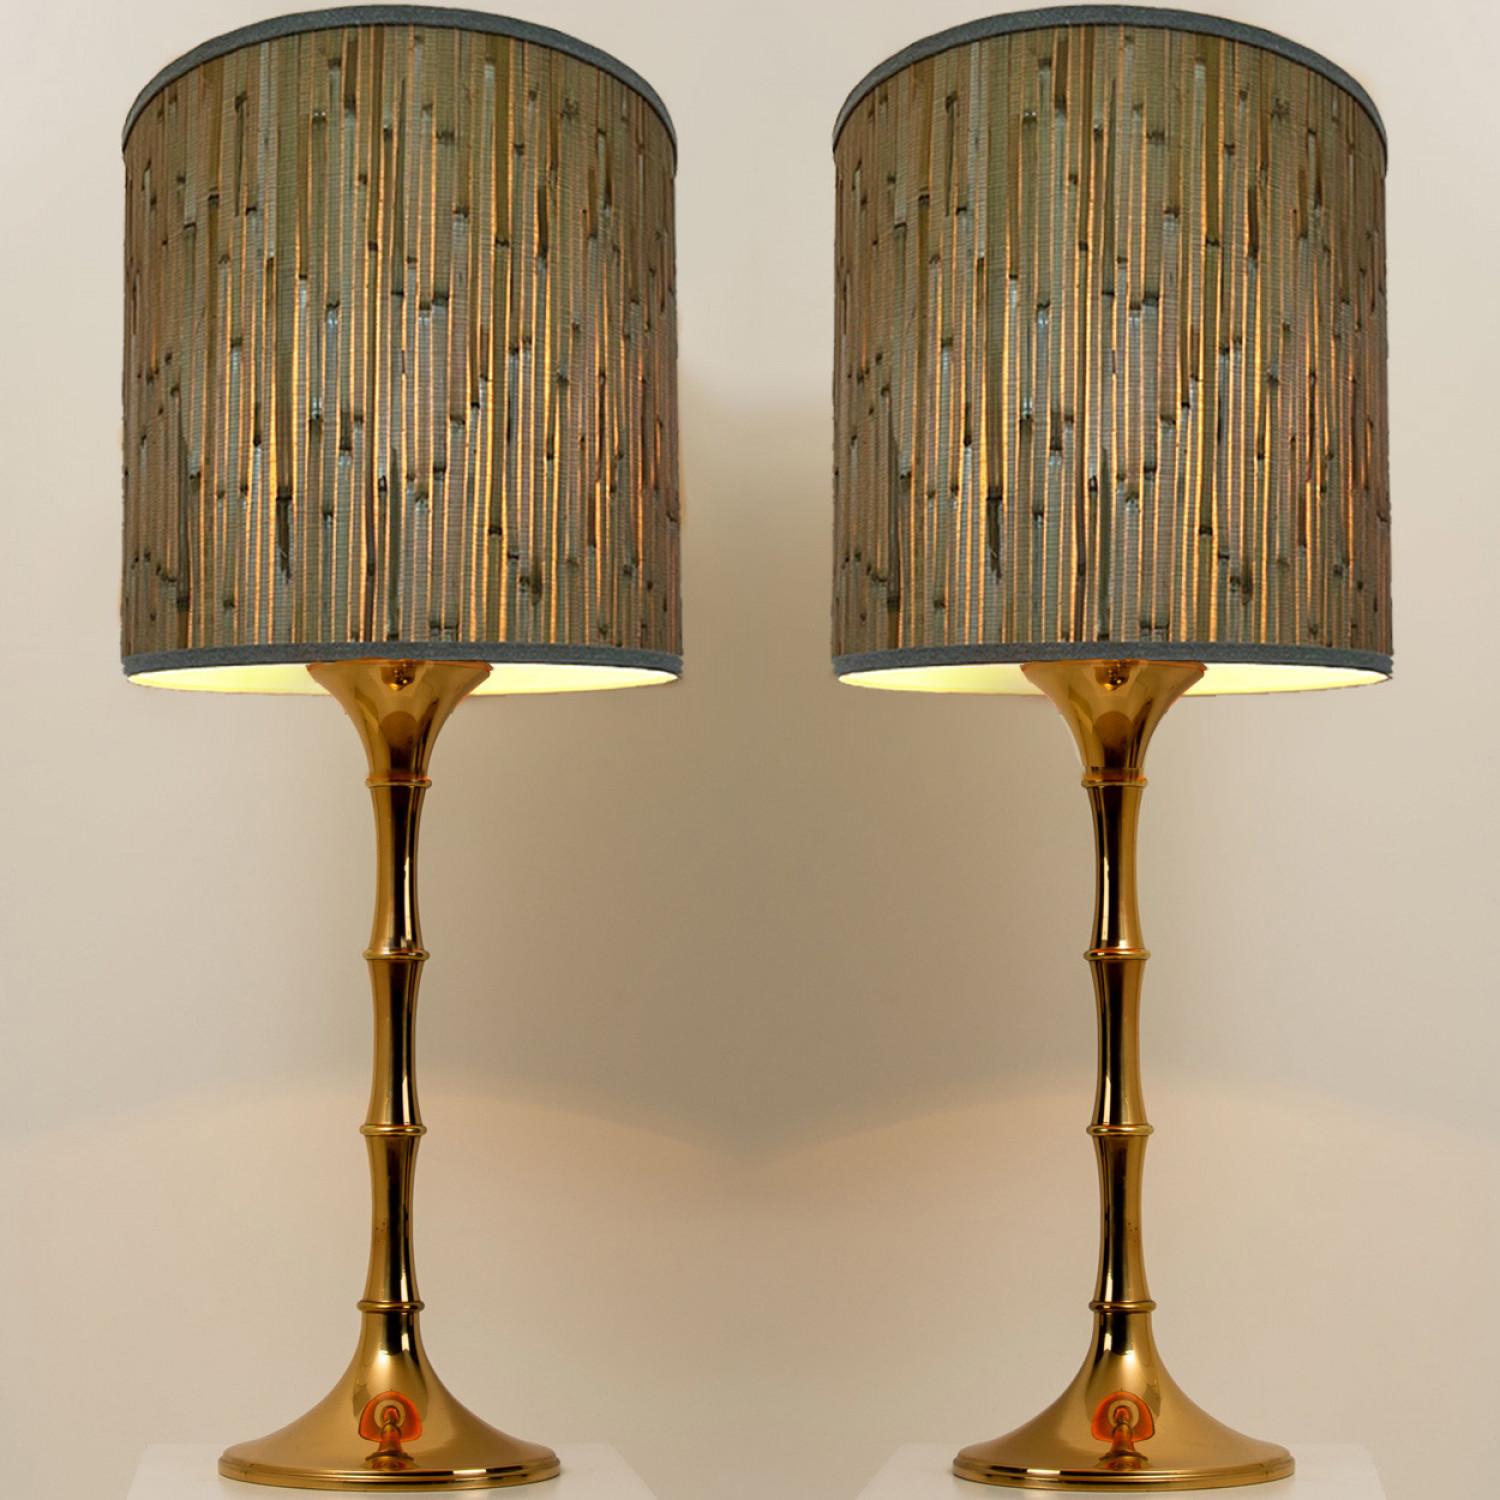 Other Pair of Table Lamps Gold Brass and Bamboo by Ingo Maurer, Europe, Germany, 1968 For Sale